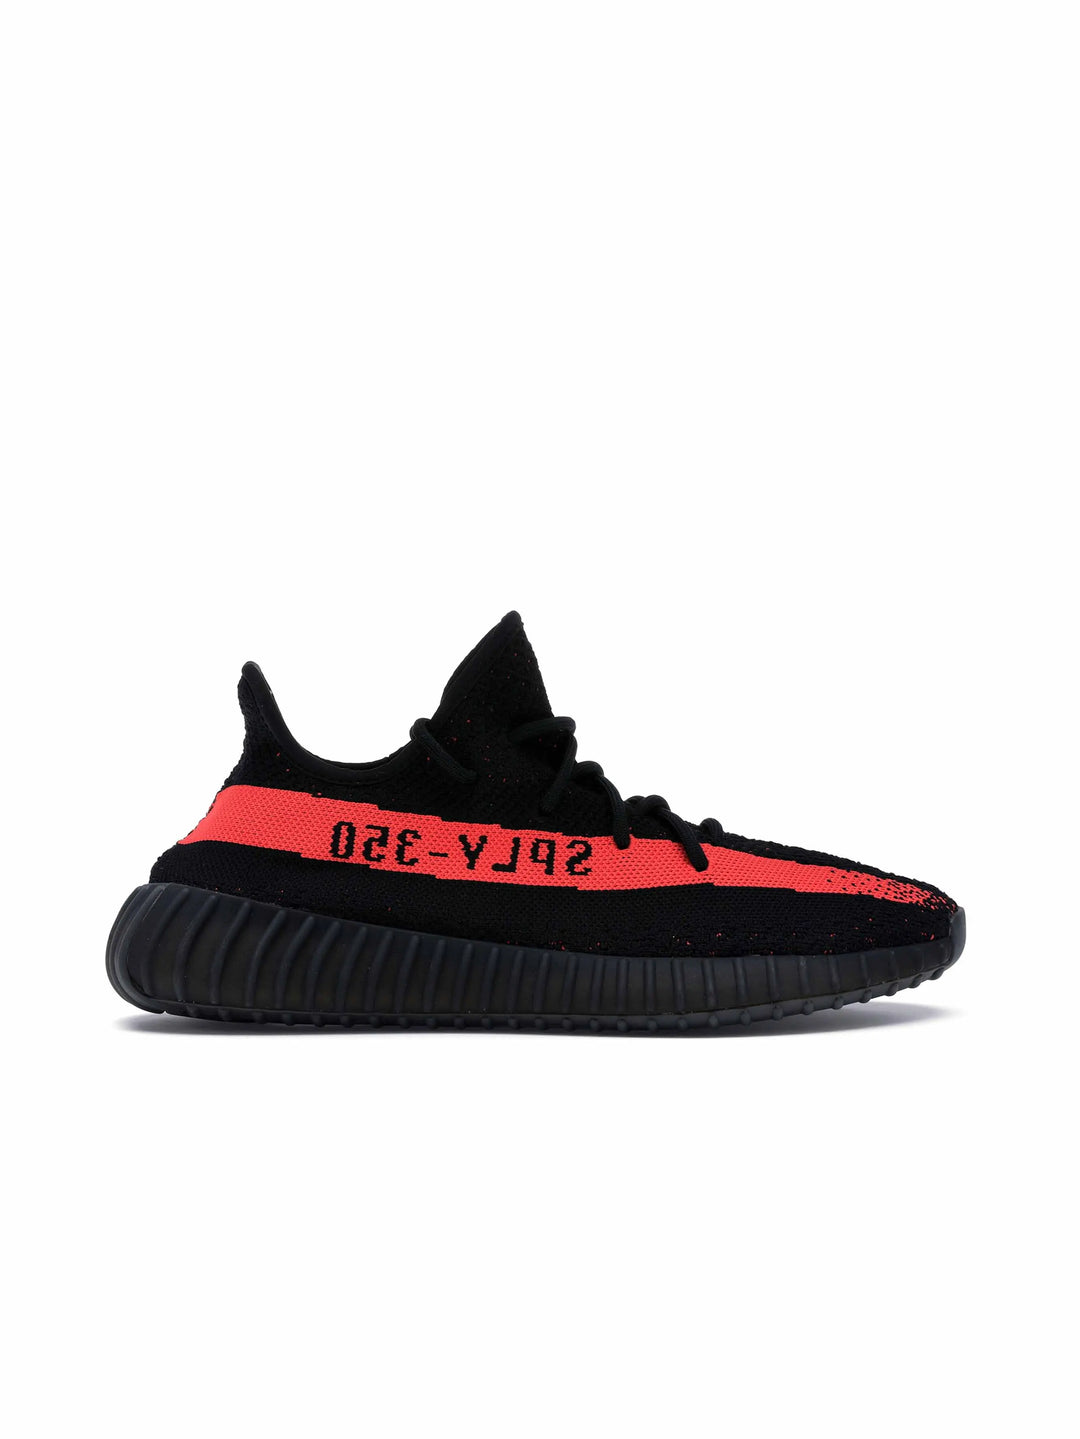 adidas Yeezy Boost 350 V2 Core Black Red (2016/2022/2023) Prior